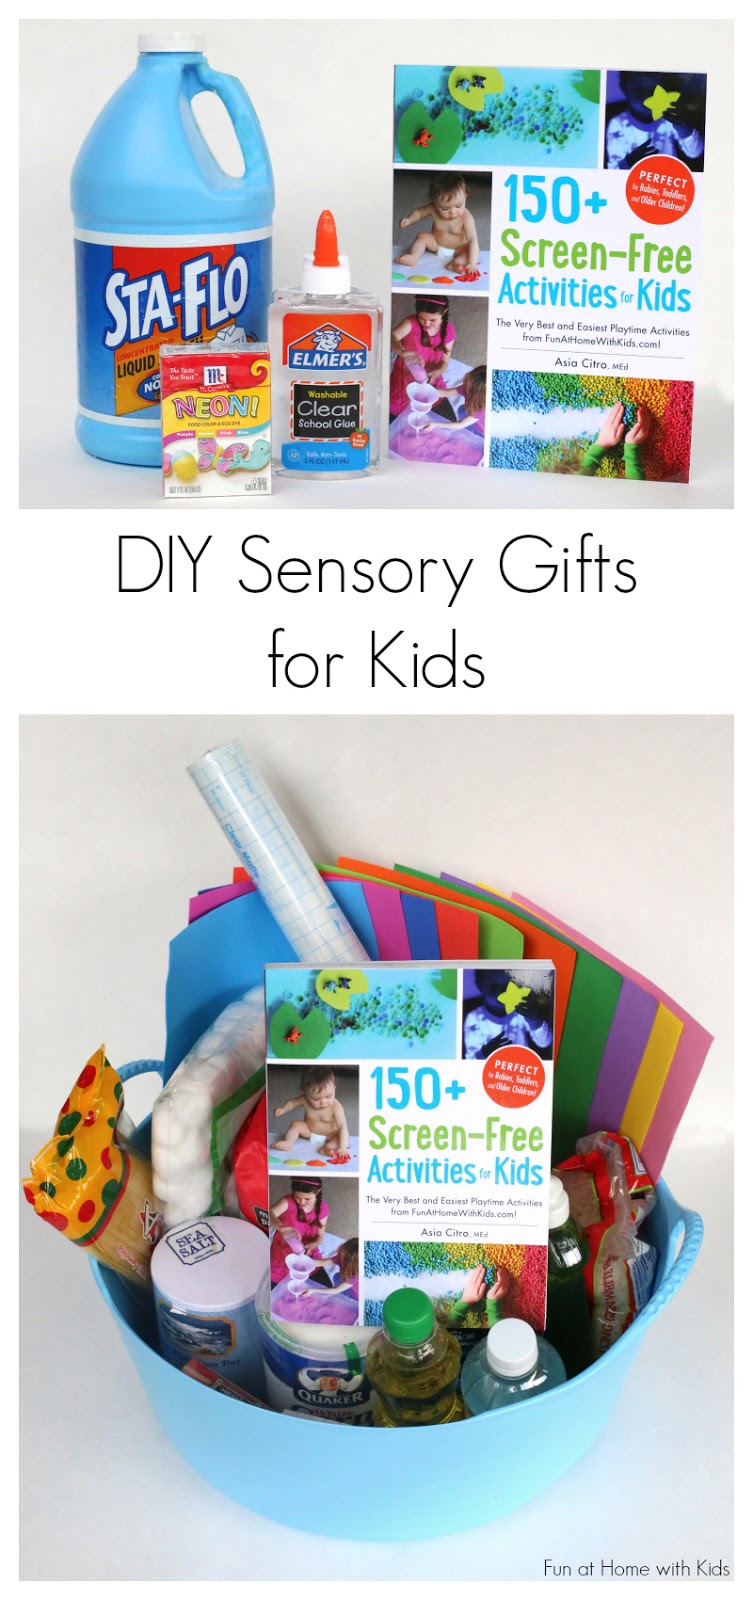 DIY Kits for Creative Gifts:  Ideas for small or large sensory kits for a gift for a friend or classmate, your child's preschool teacher or caregiver, a grandparents house or babysitter's kit, gift basket for a fundraising auction, birthday party or baby shower gift!  From Fun at Home with Kids